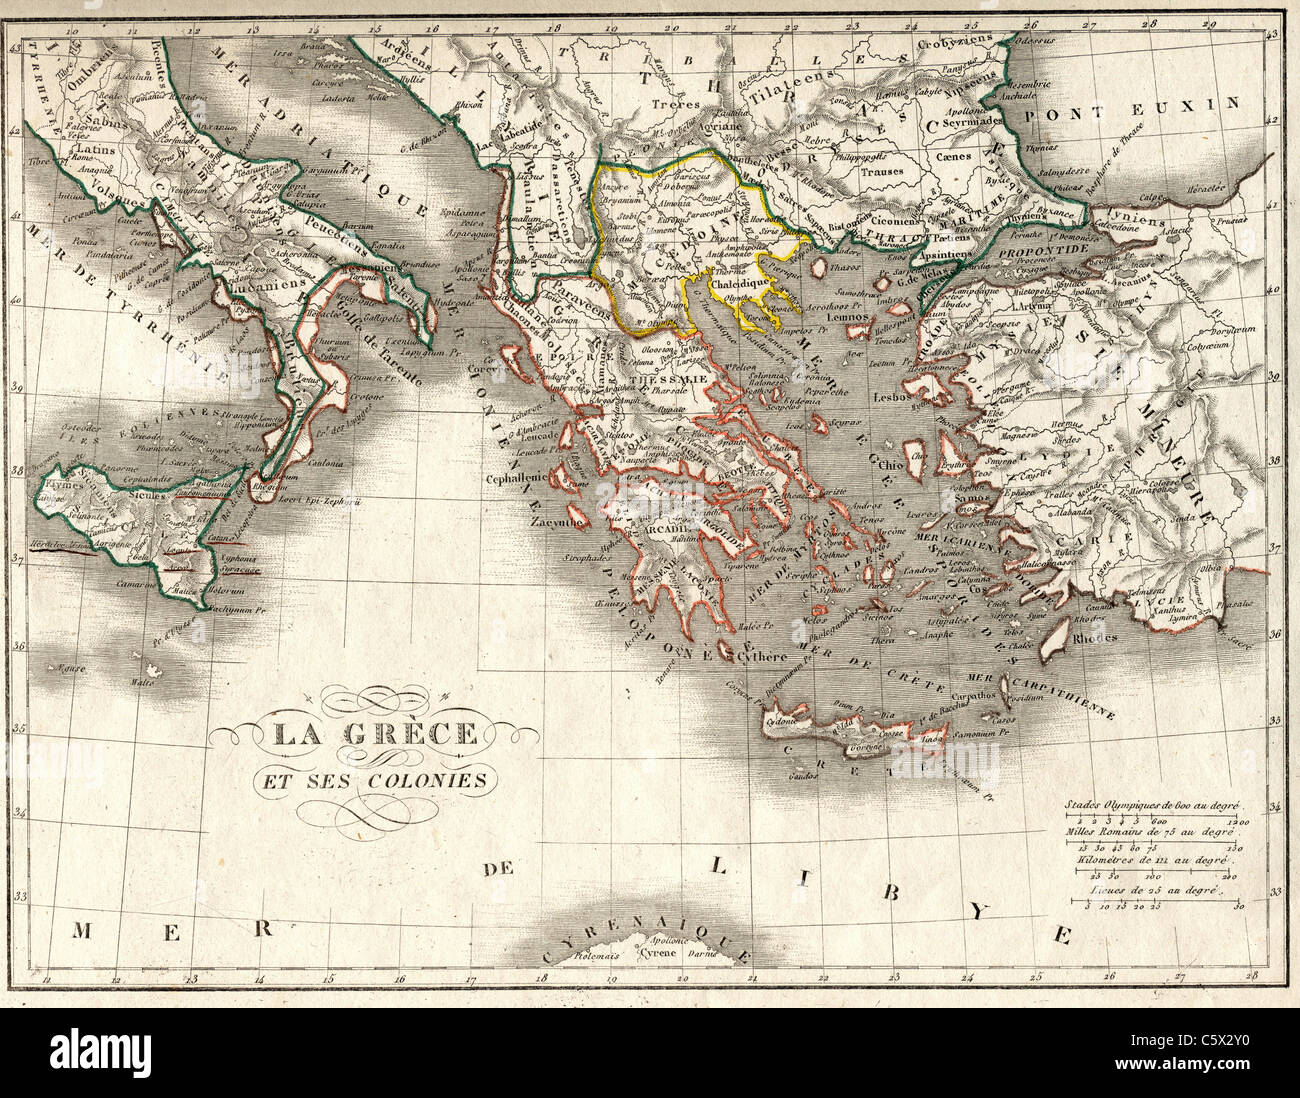 La Grece et ses Colonies (Greece and its Colonies) Antiquarian Map from 'Atlas Universel de Geographie Ancienne and Moderne' by C. V. Monin Stock Photo